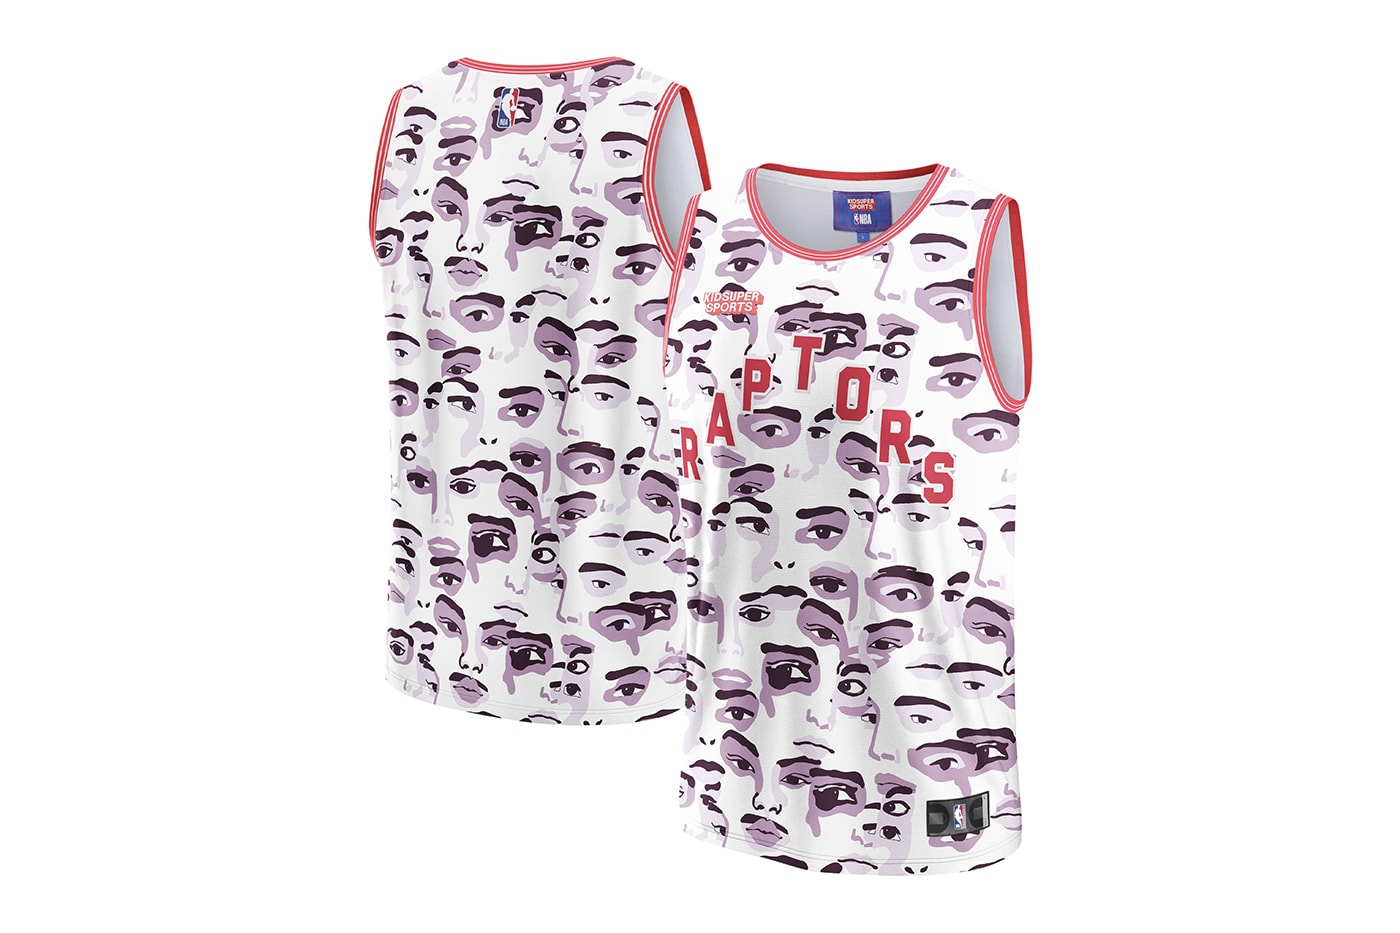 Available now: The Miami Heat KidSuper jersey